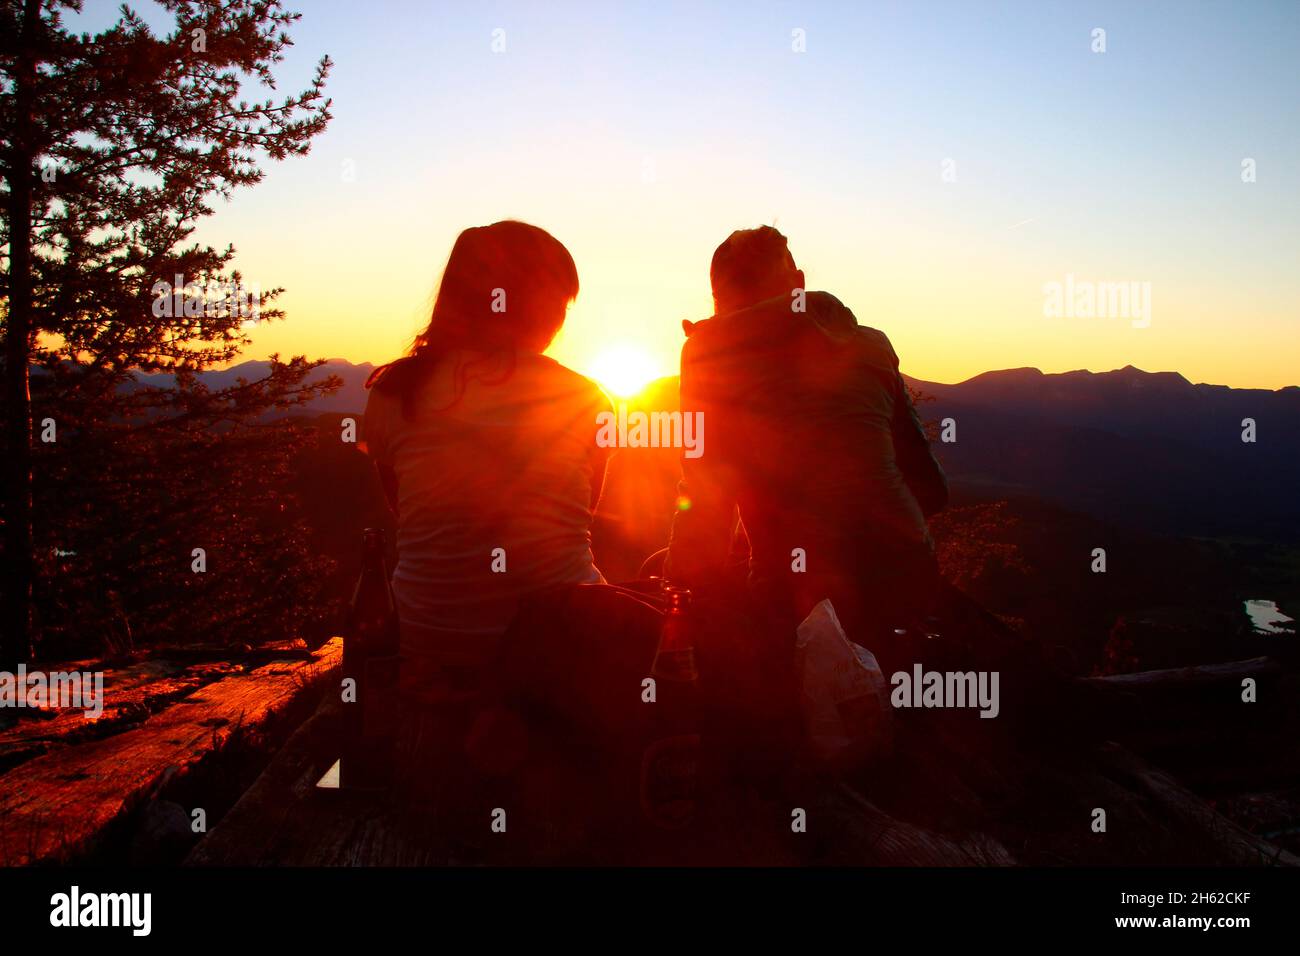 two young women,snack,drink,bottle of shilouette,rejoice in the backlight,sunset,photographed at the mittenwalder hut on the karwendel,mittenwald,upper bavaria,isar valley,bavaria,germany,europe, Stock Photo